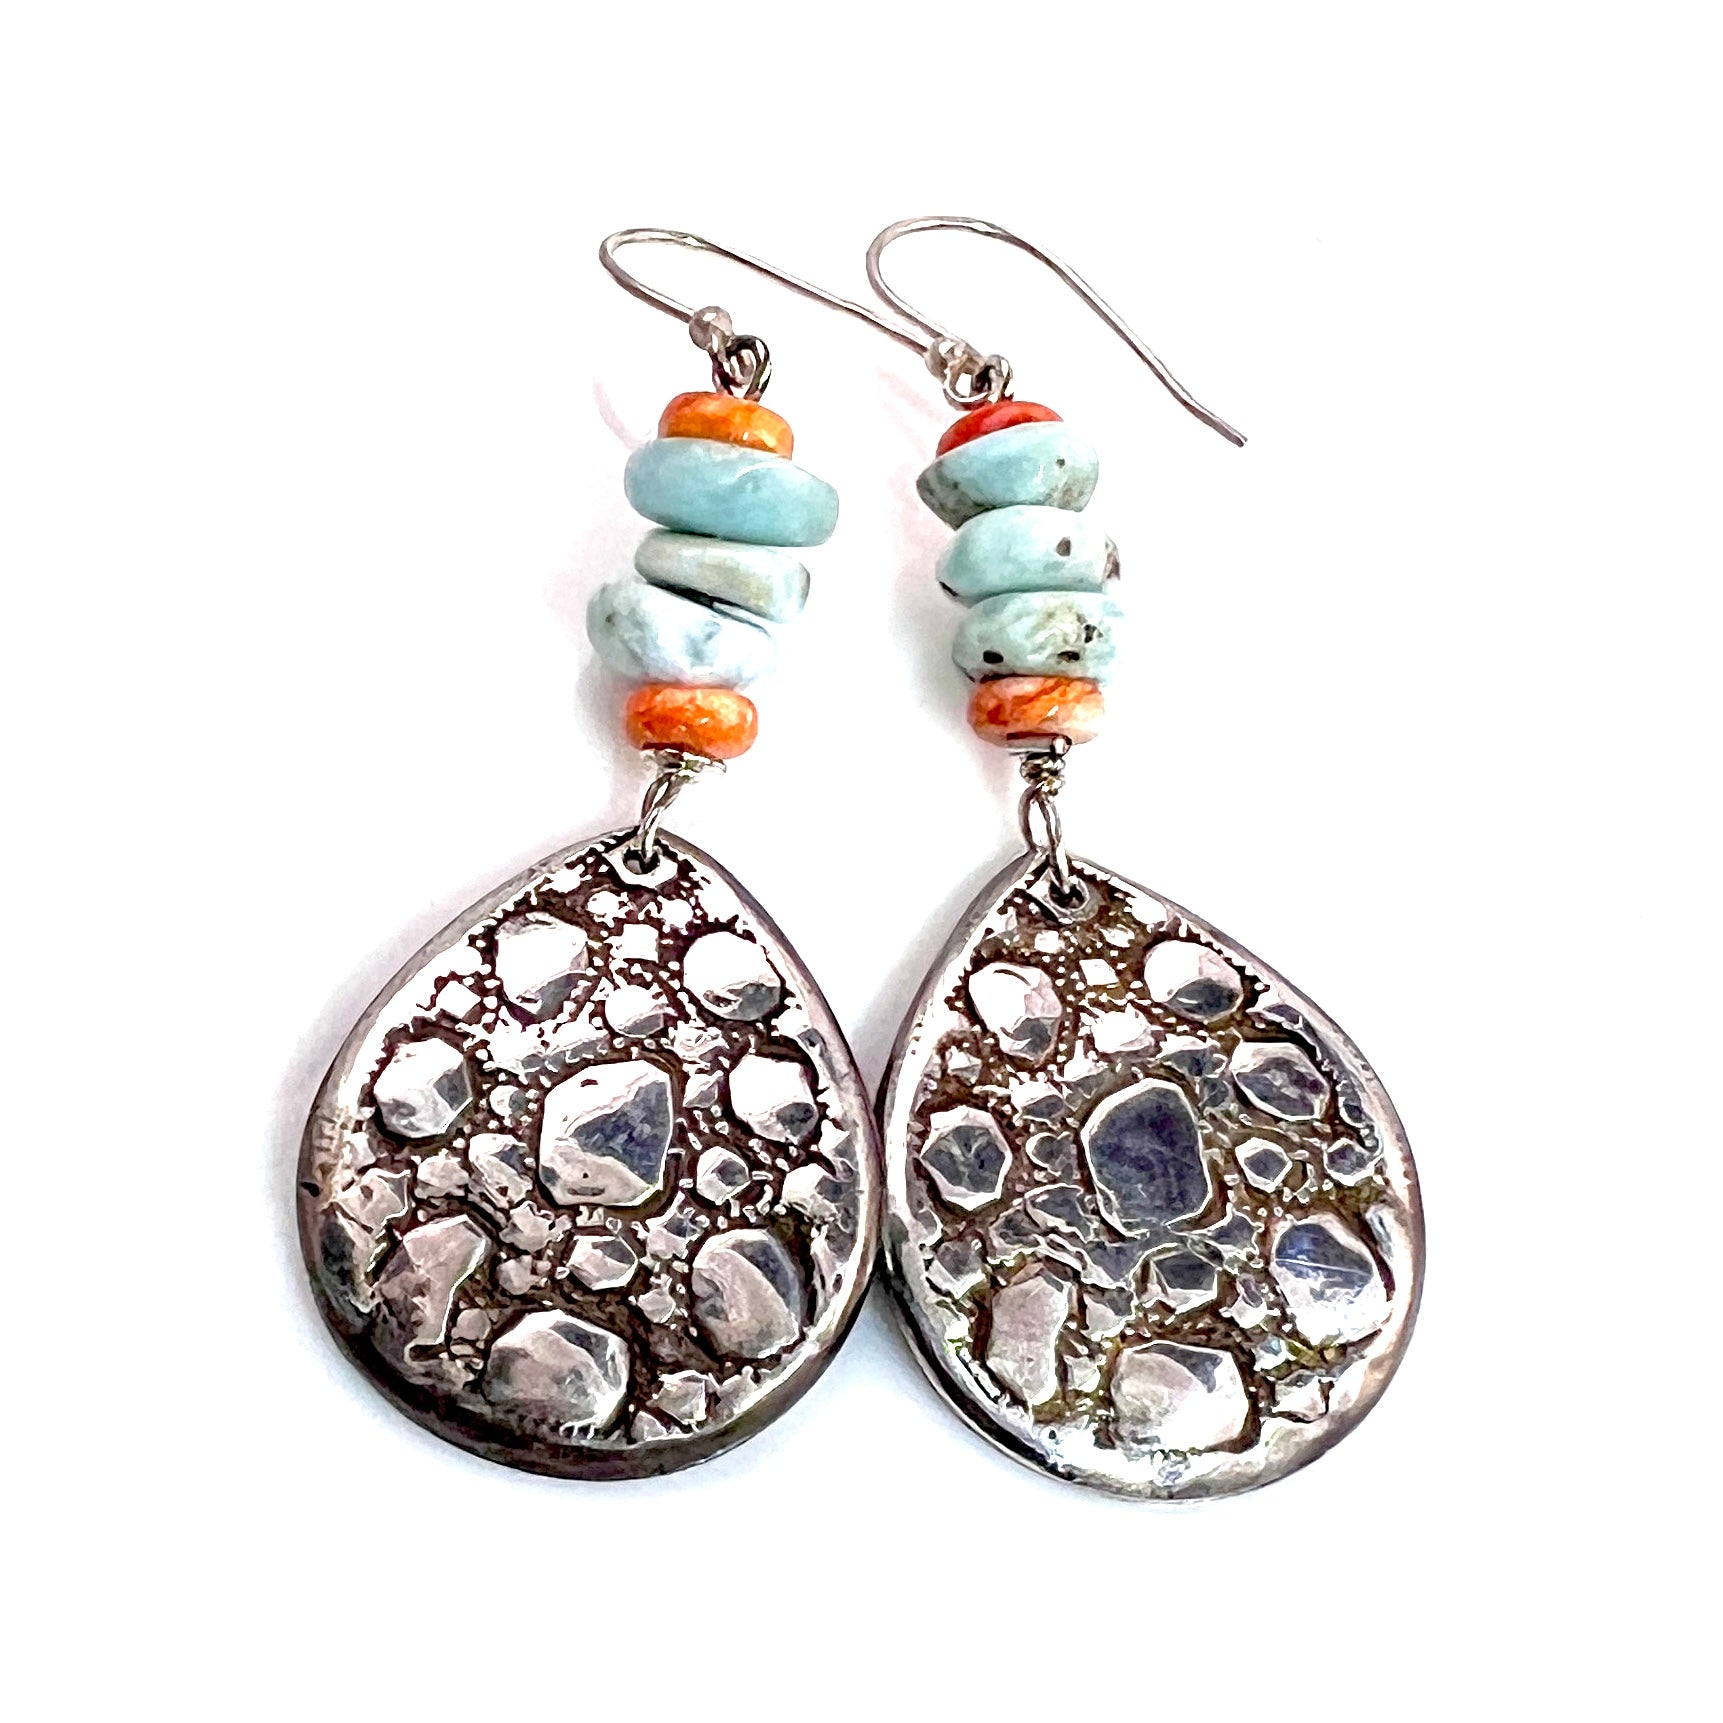 Larimar & Spiny Oyster Cobble Stone .999 Fine Silver Earrings - Keja Designs Jewelry